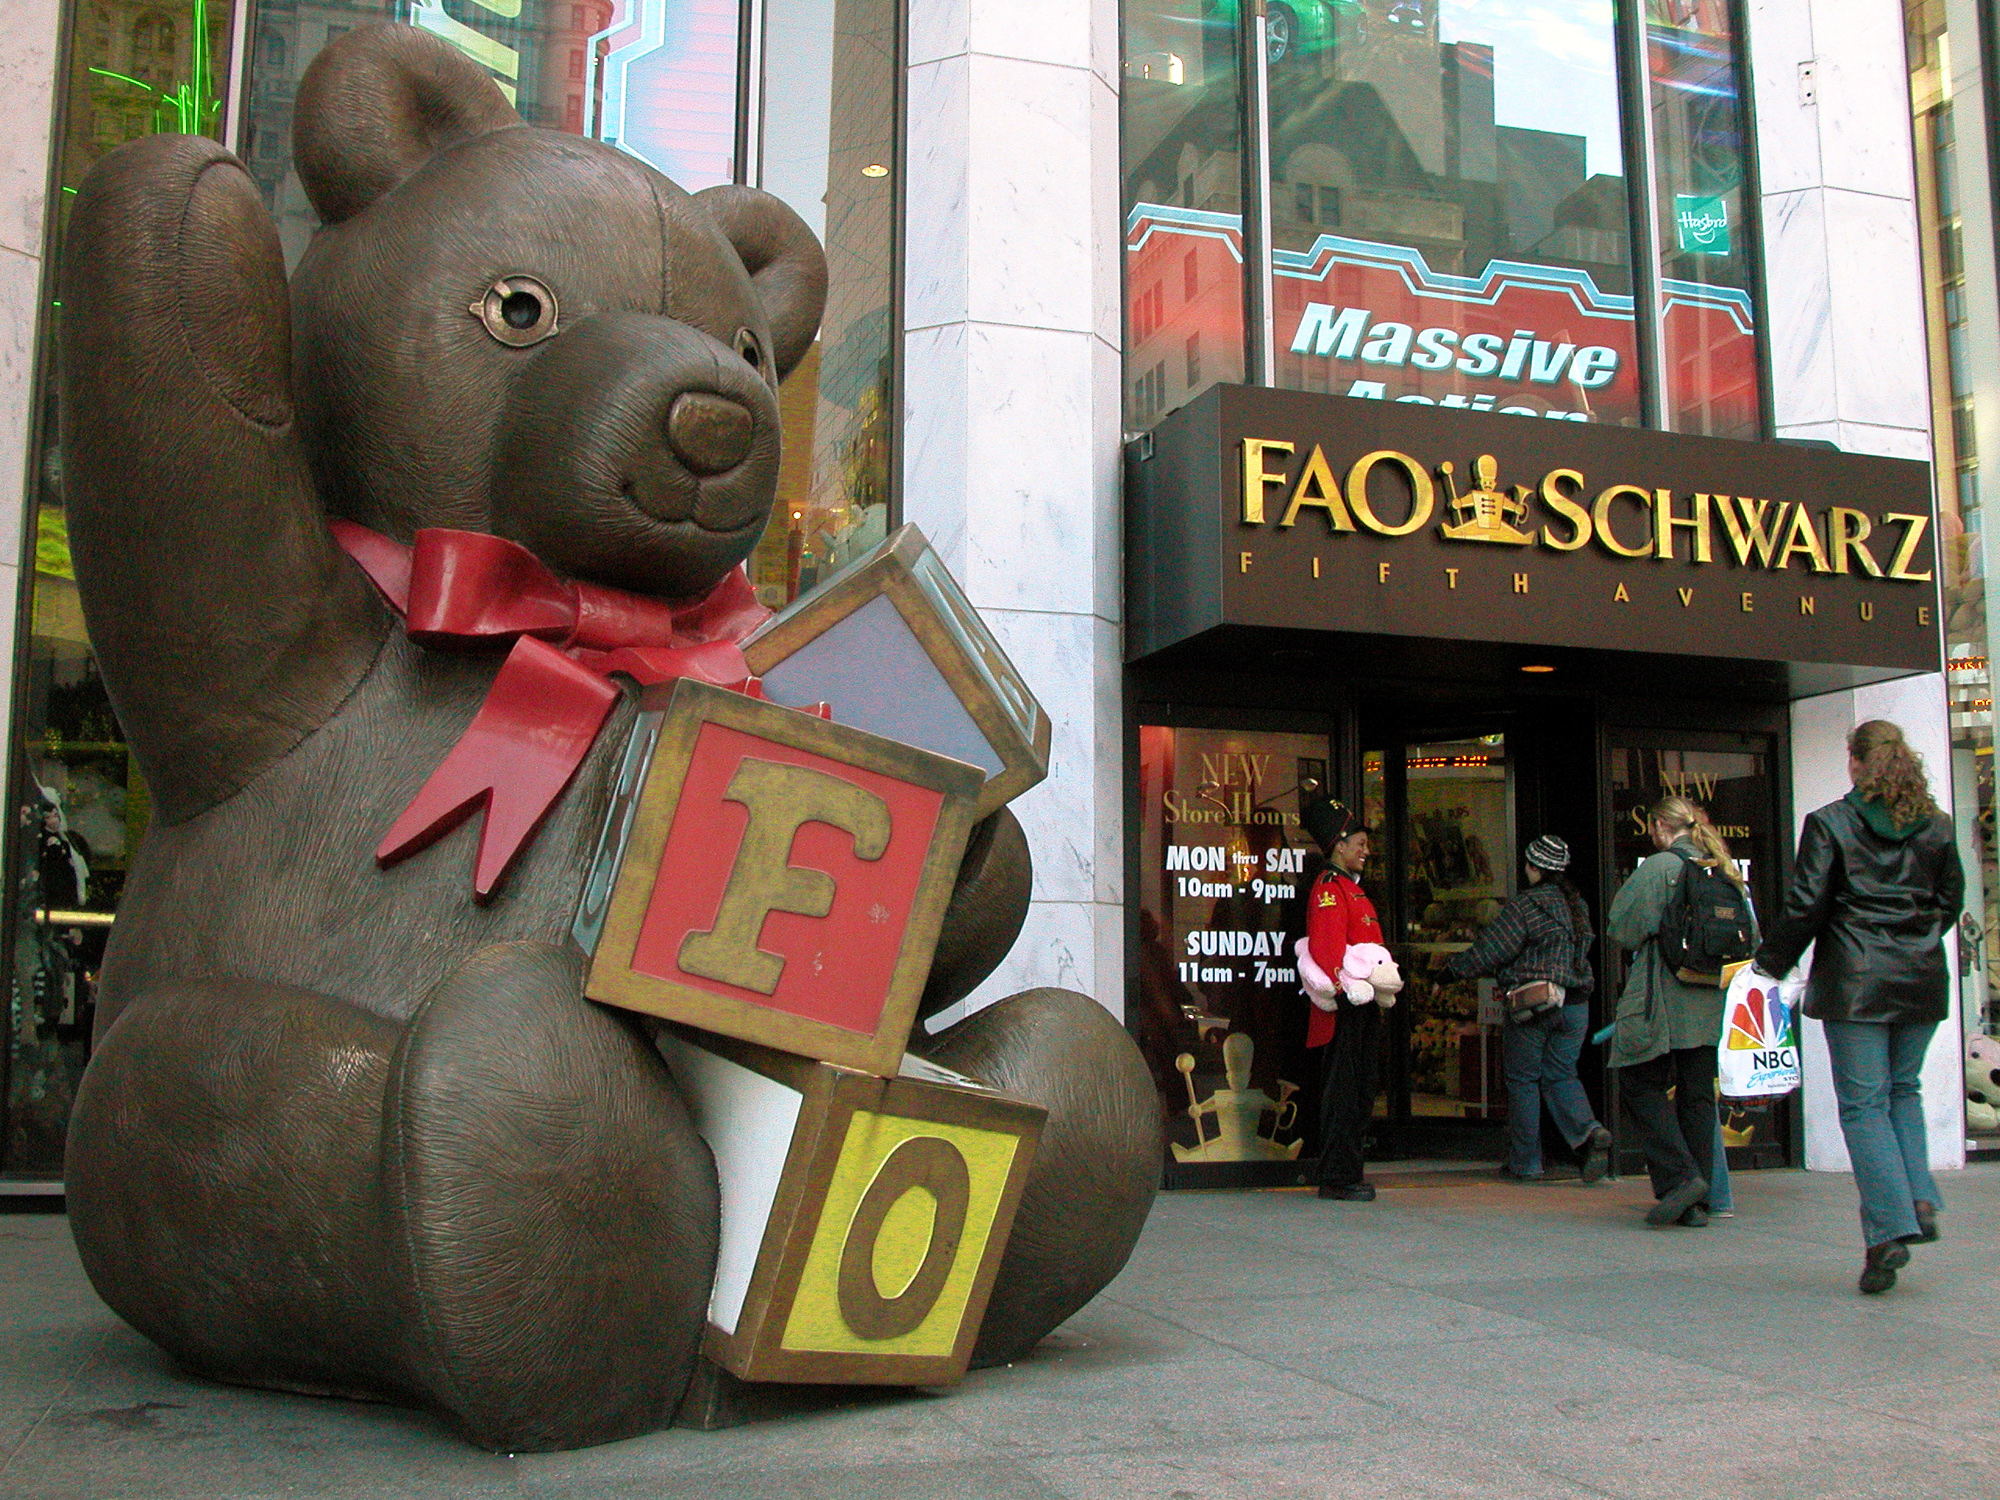 ThreeSixty Group unveils details about the new FAO Schwarz - New